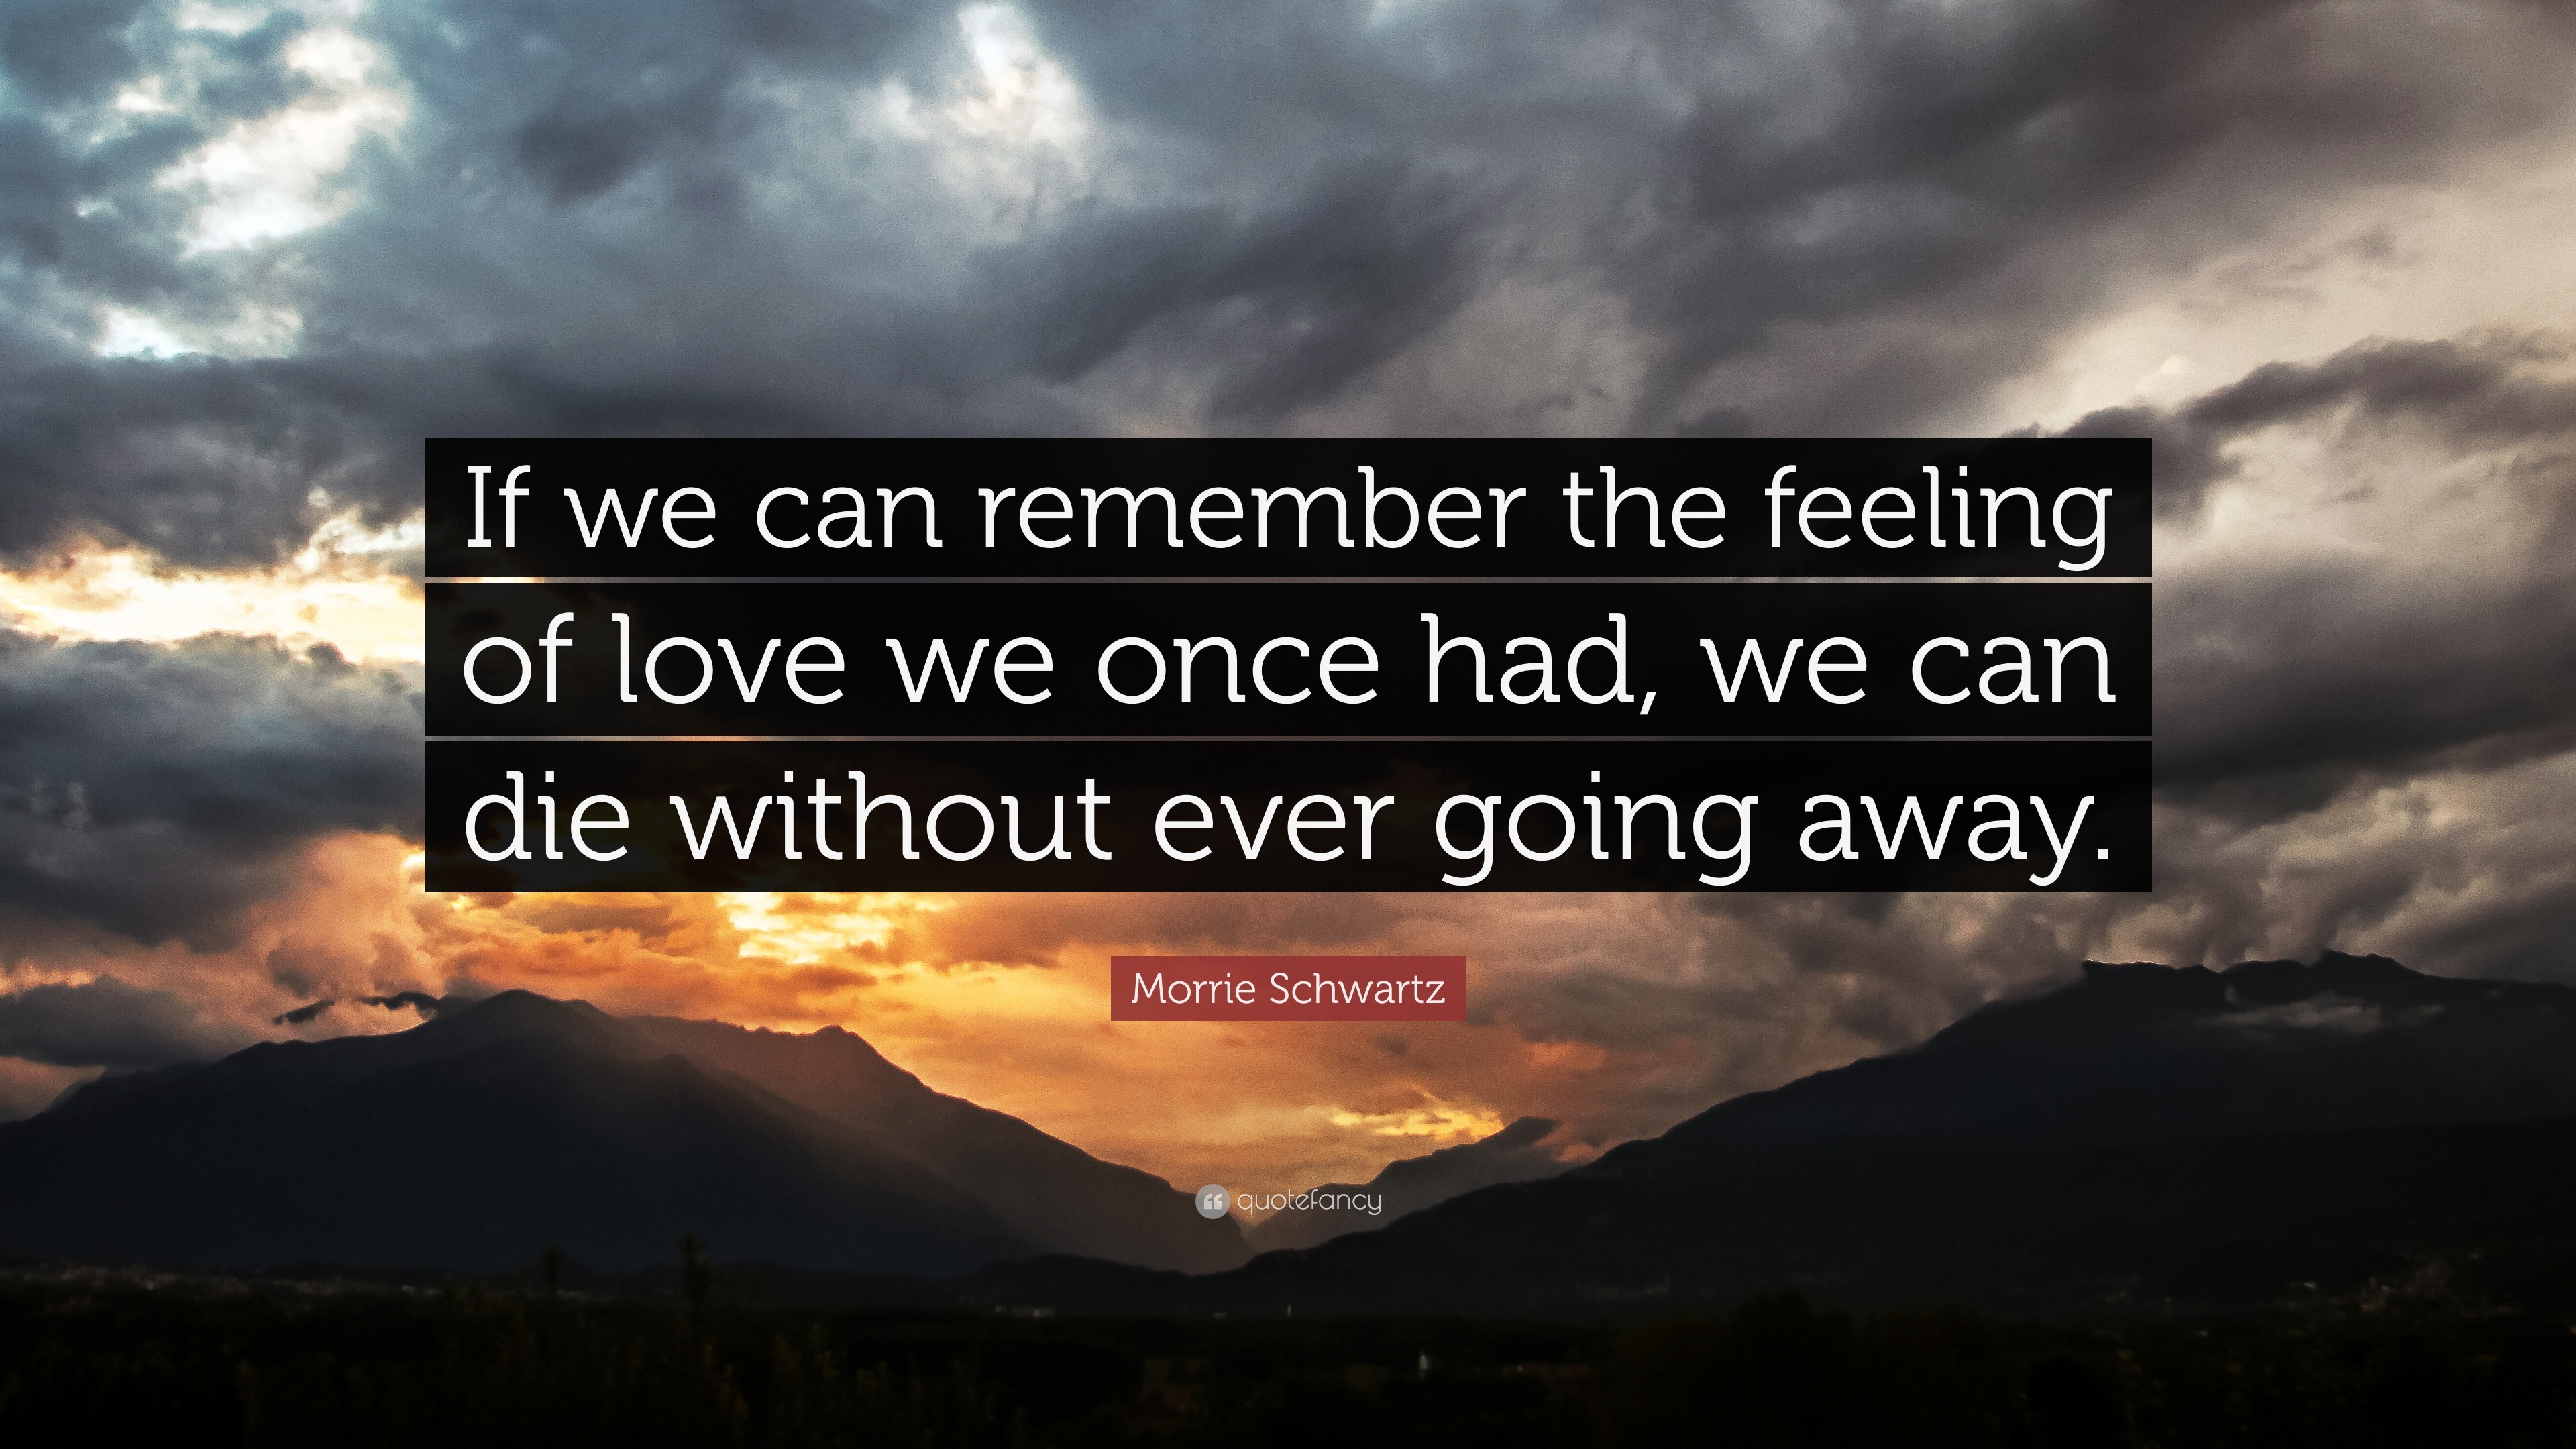 Morrie Schwartz Quote “If we can remember the feeling of love we once had